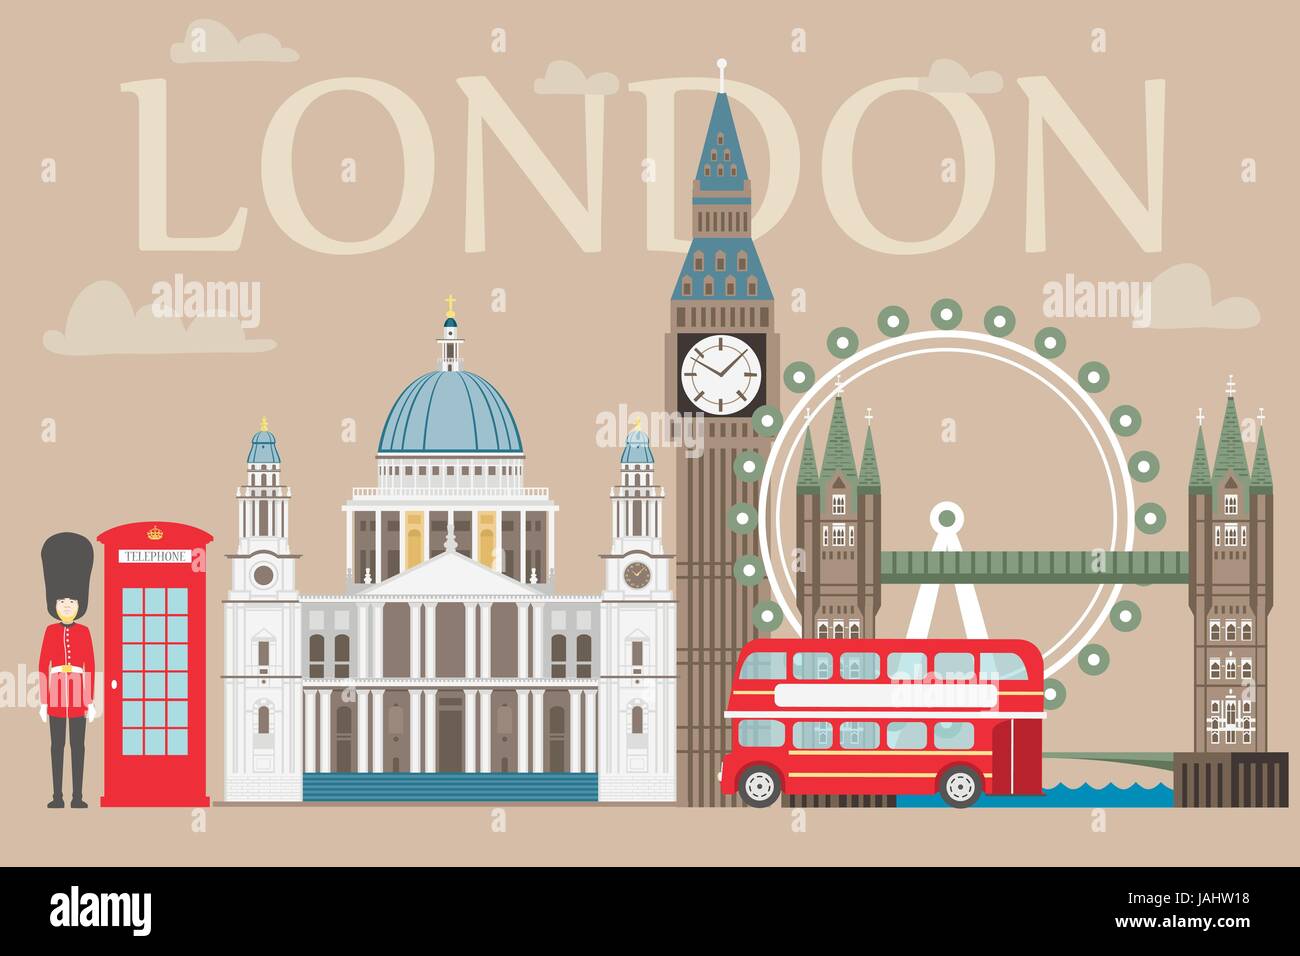 London travel info graphic. Vector illustration, Big Ben, eye, tower bridge and double decker bus, Police box, St Pauls Cathedral, queens guards, telephone. Stock Vector